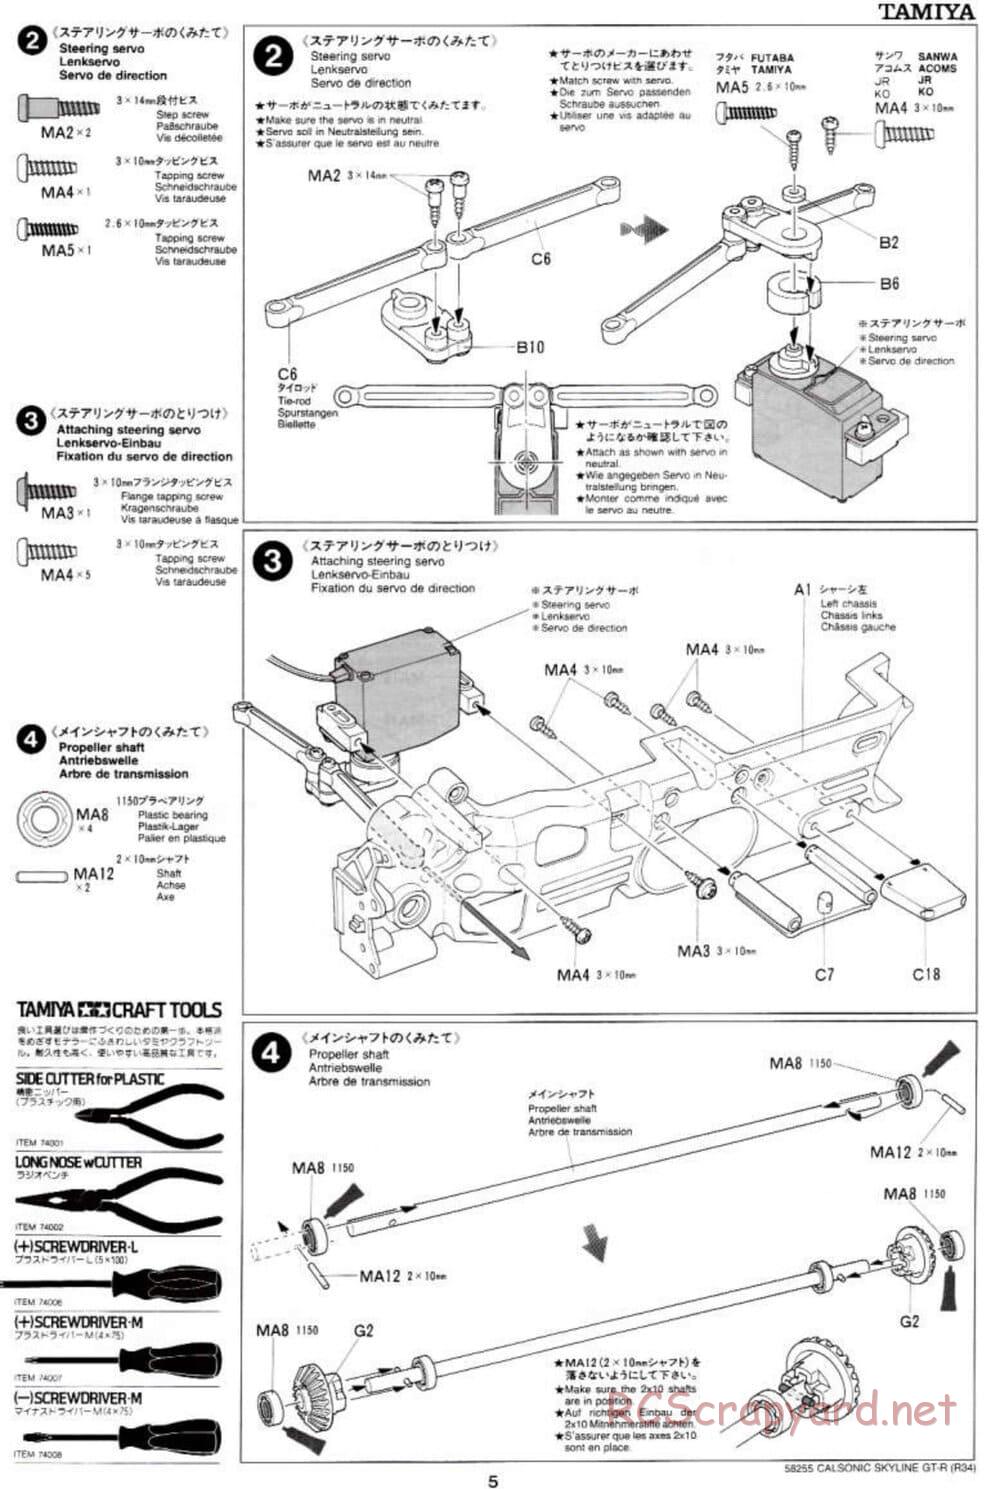 Tamiya - Calsonic Skyline GT-R (R34) - TL-01 Chassis - Manual - Page 5